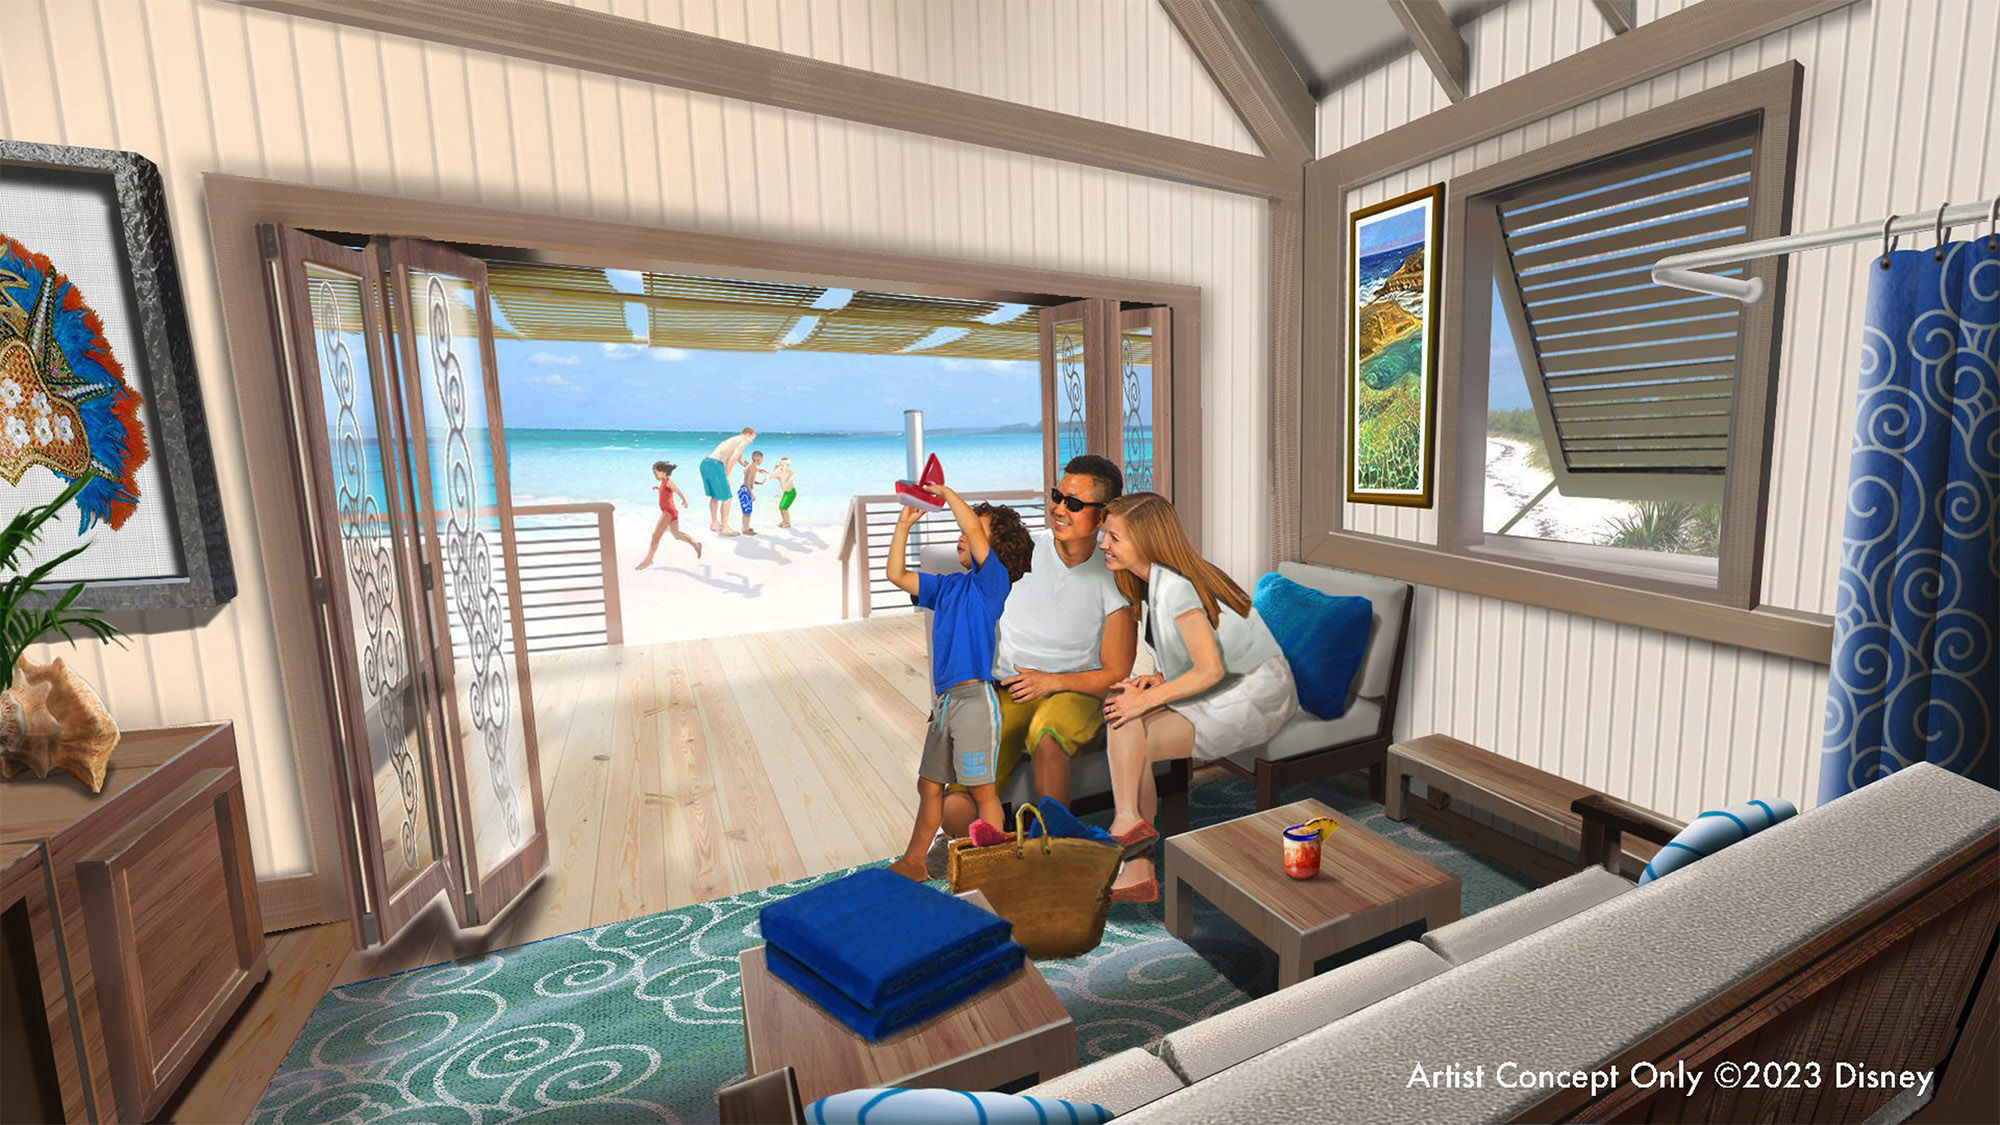 There will be premium family cabanas along the beach at Lighthouse Point.